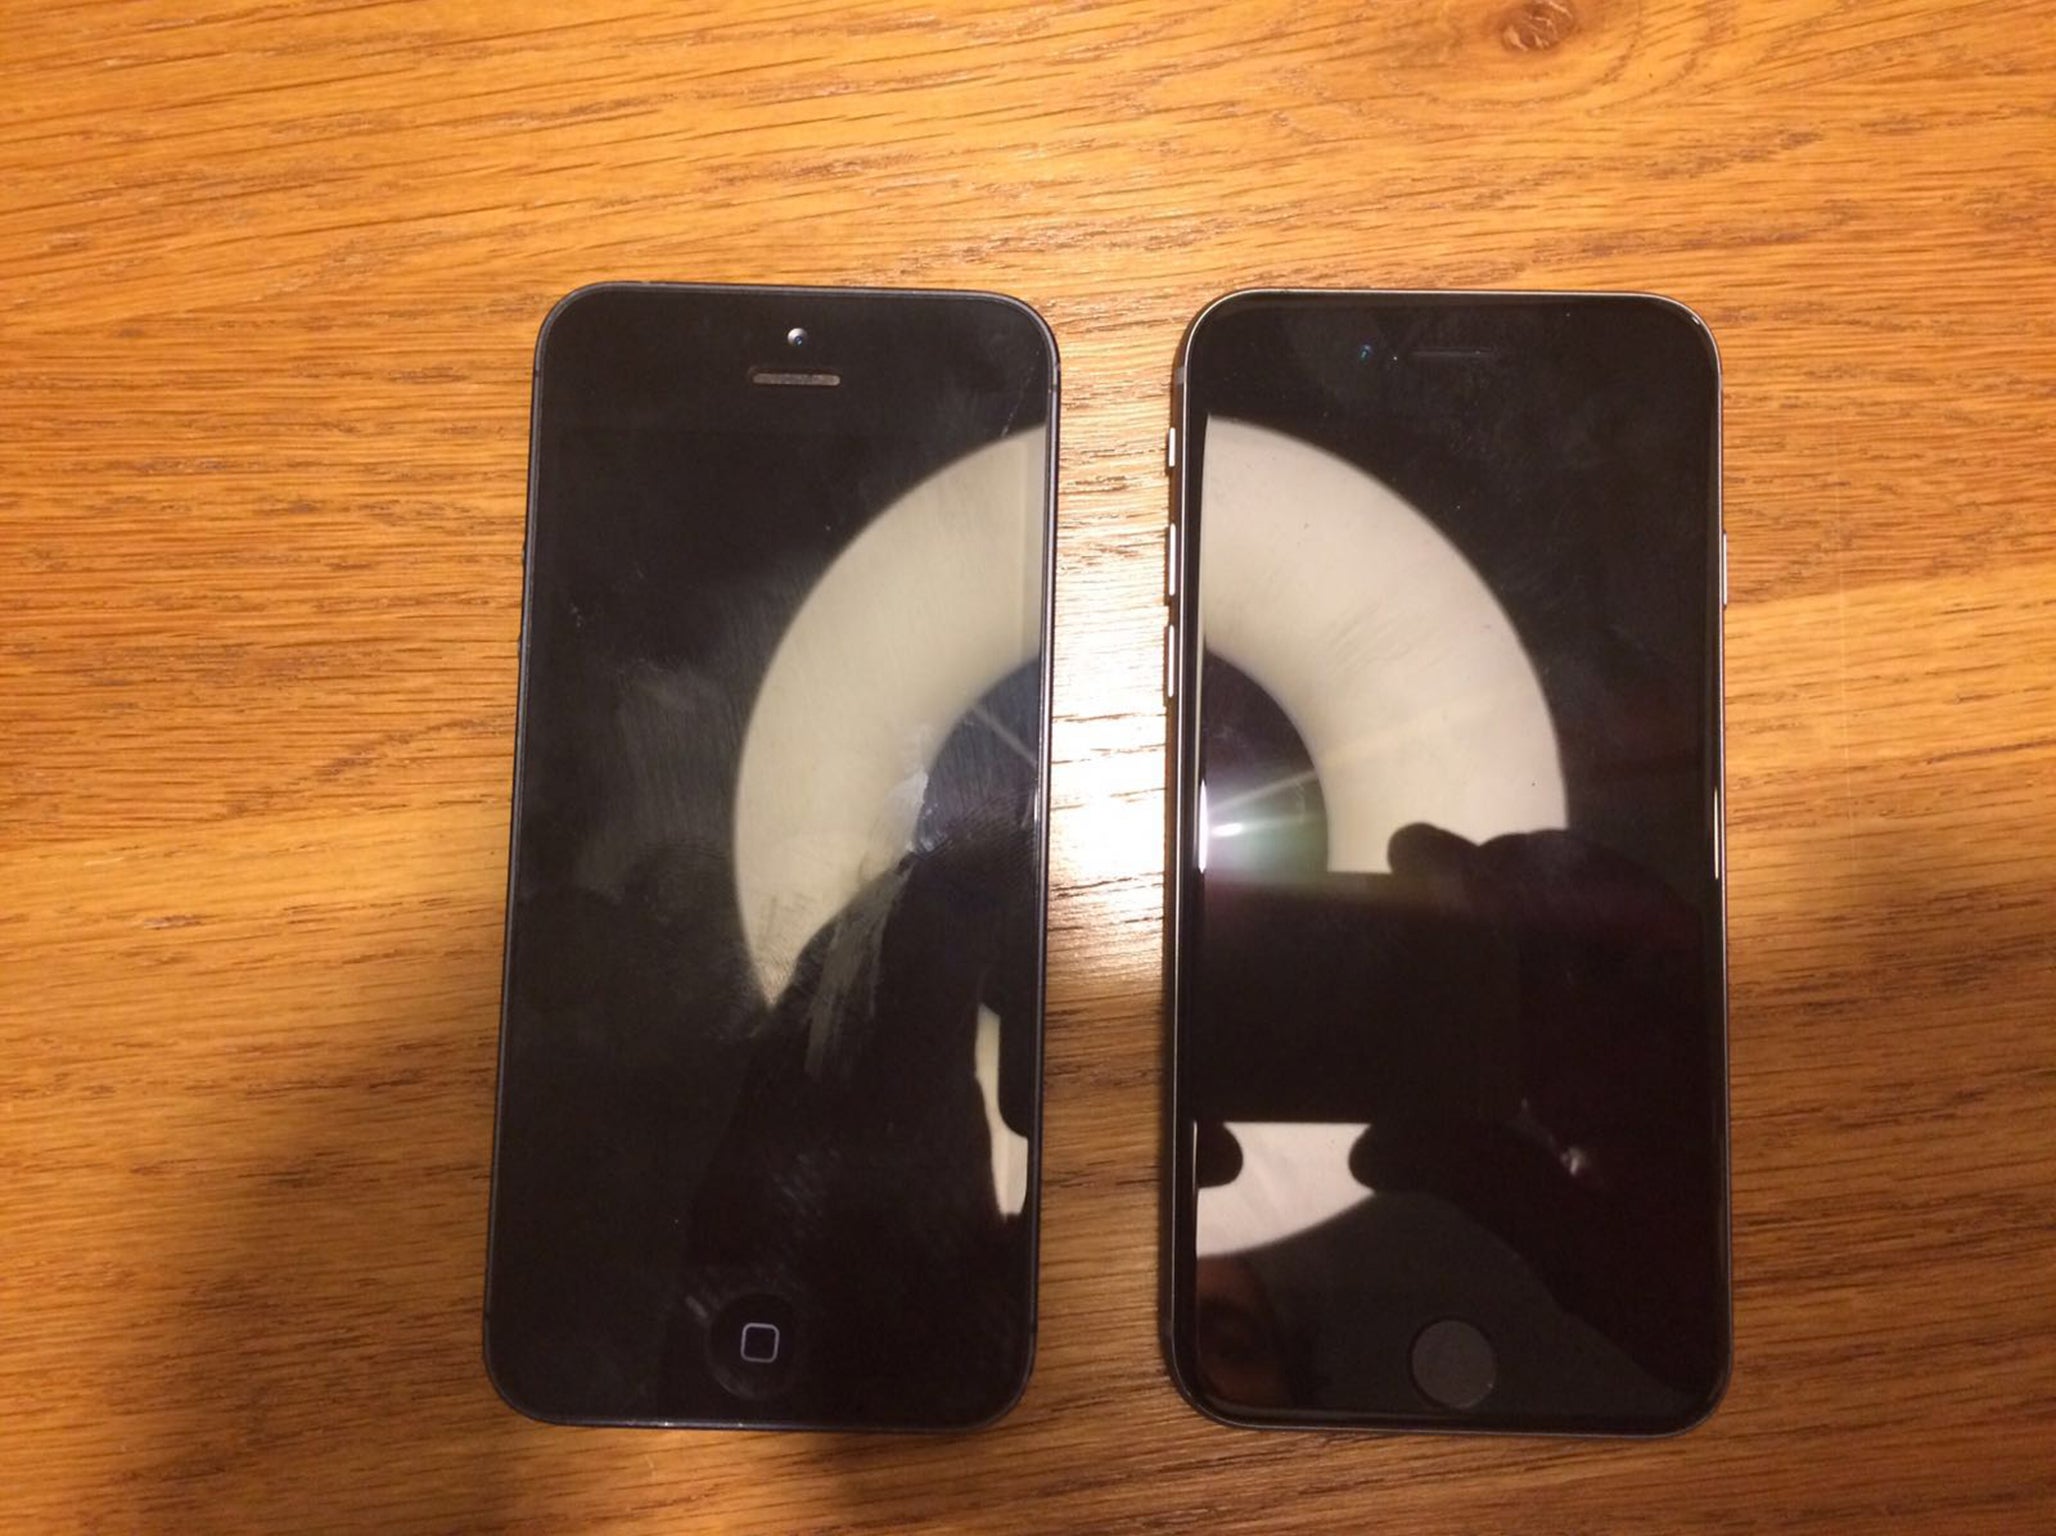 The supposed iPhone 5se shown on the right, next to what appears to be an iPhone 5